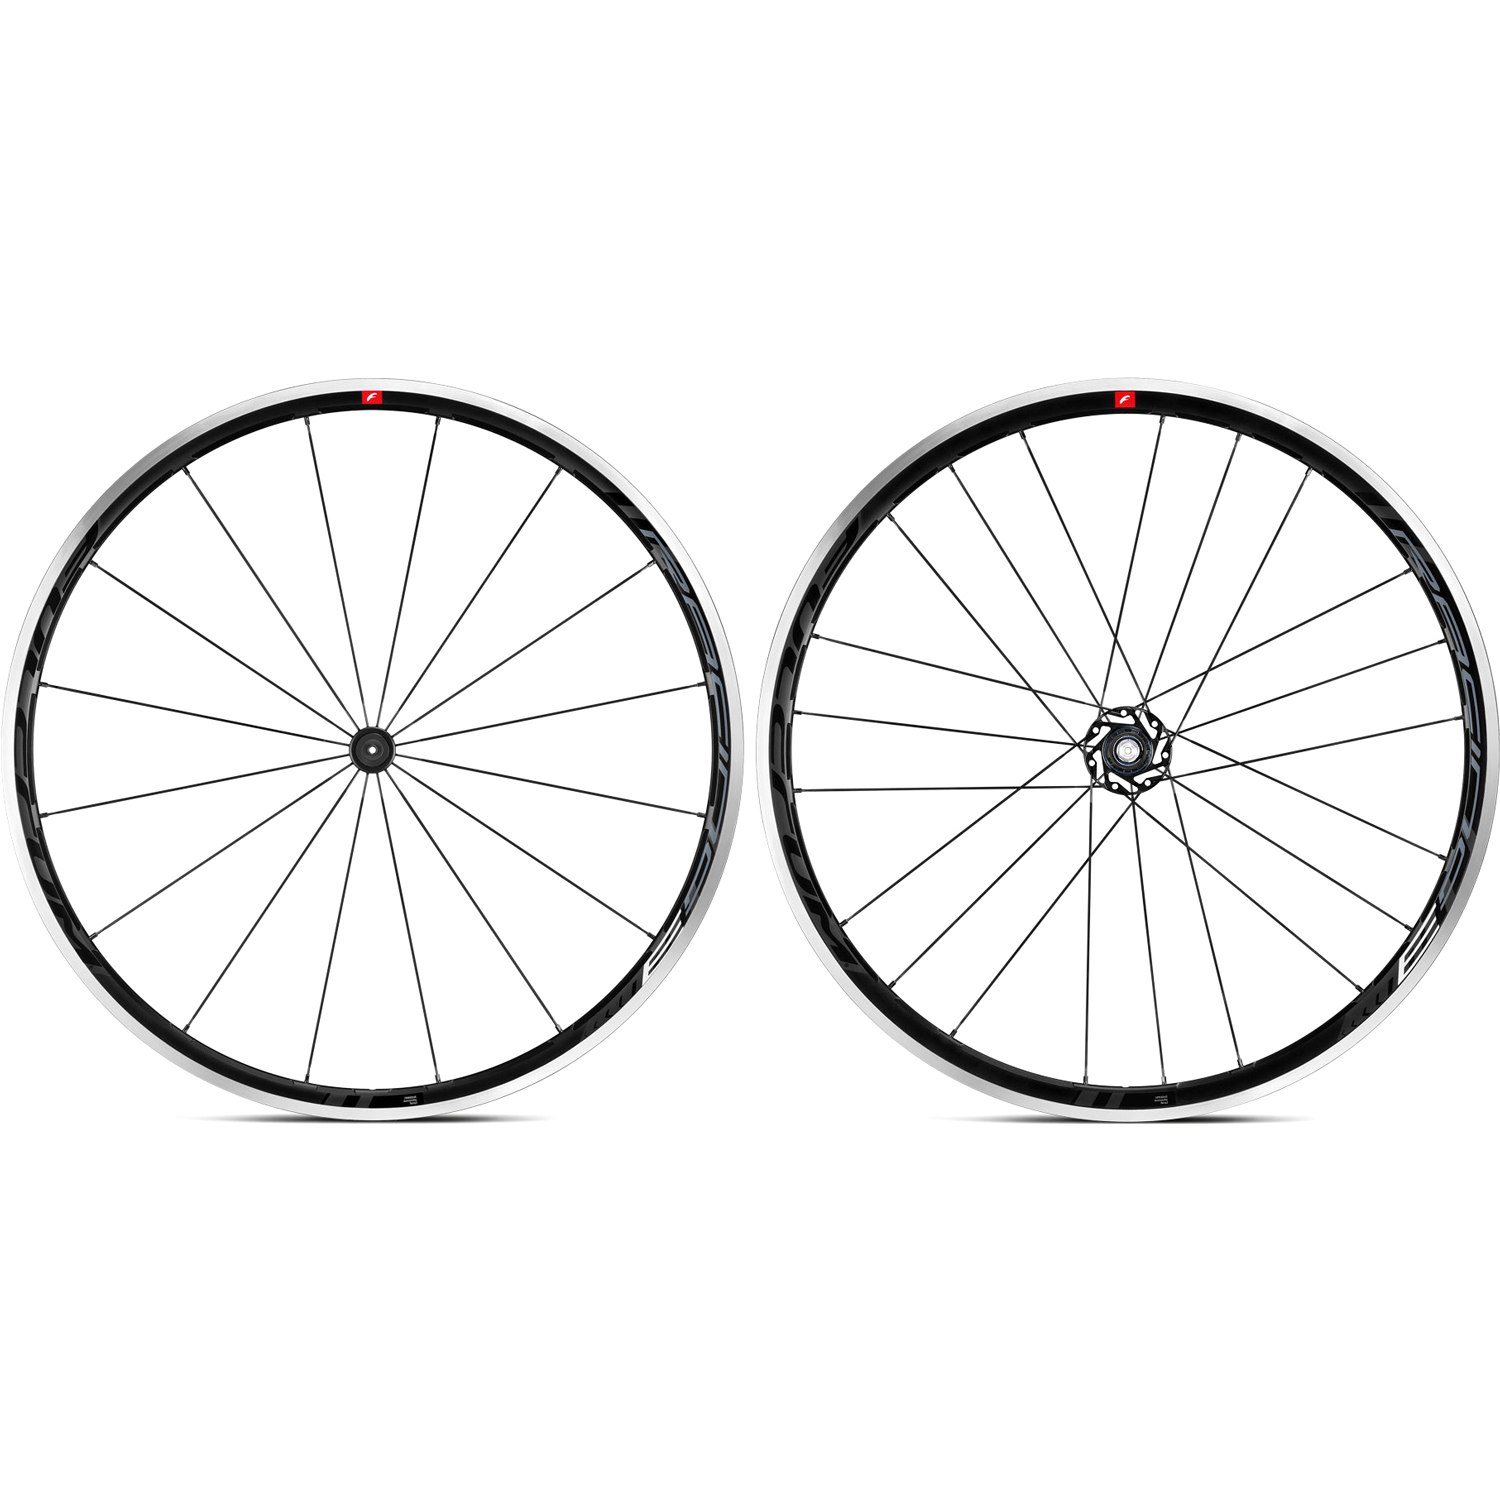 Picture of Fulcrum Racing 3 C17 Wheelset - Clincher - black